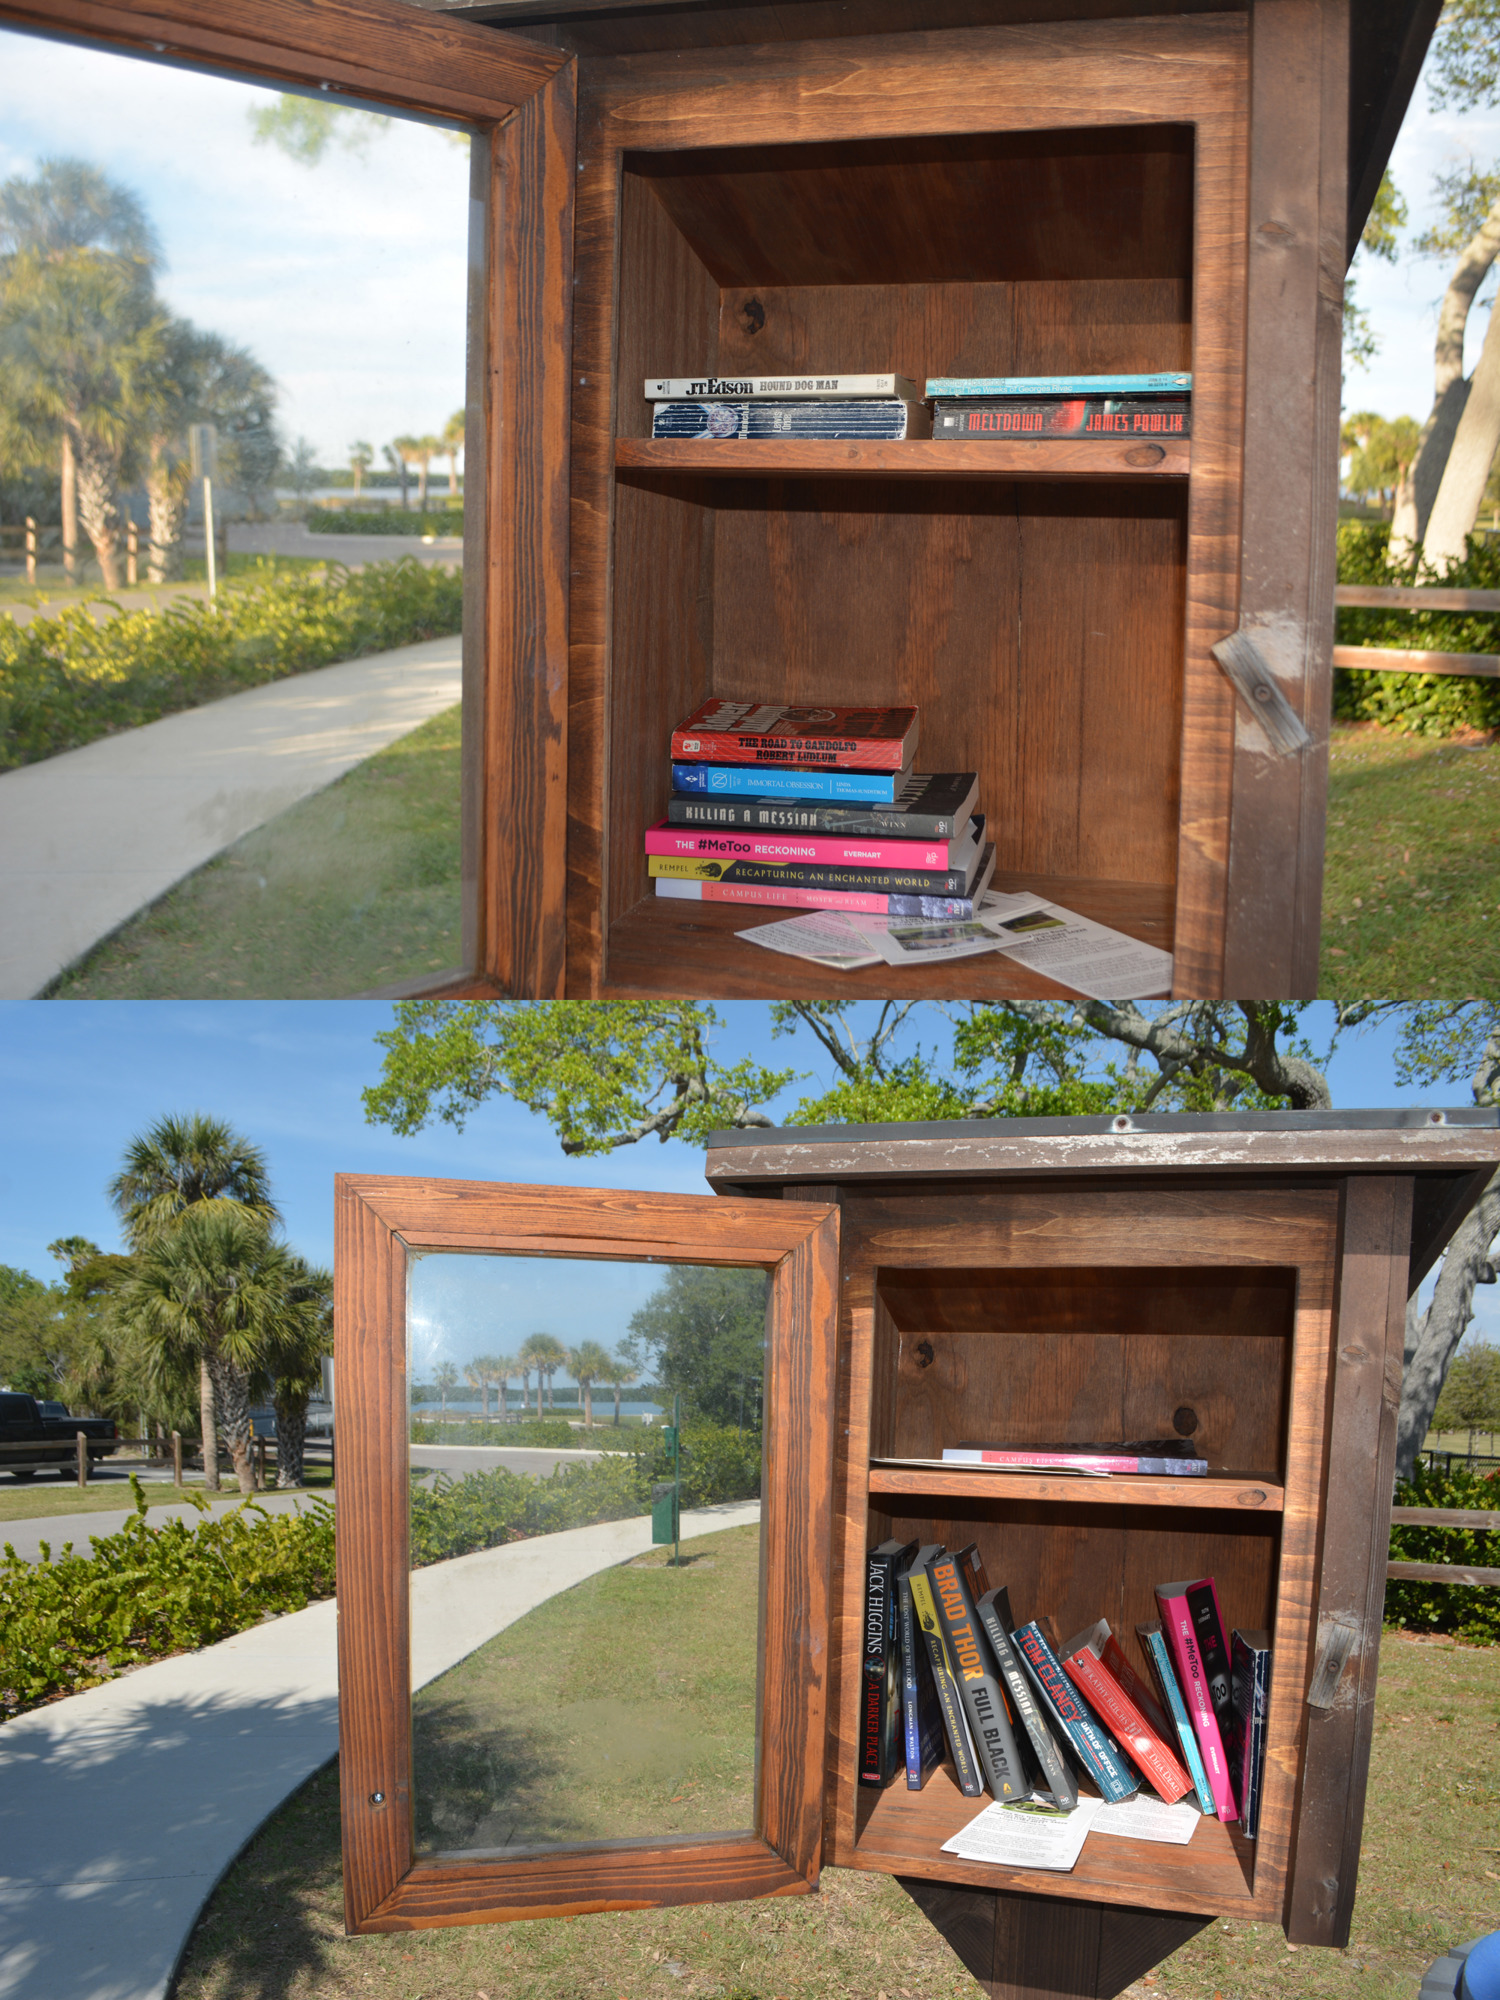 The Little Free Library at Bayfront Park on March 6 (top) and March 12.